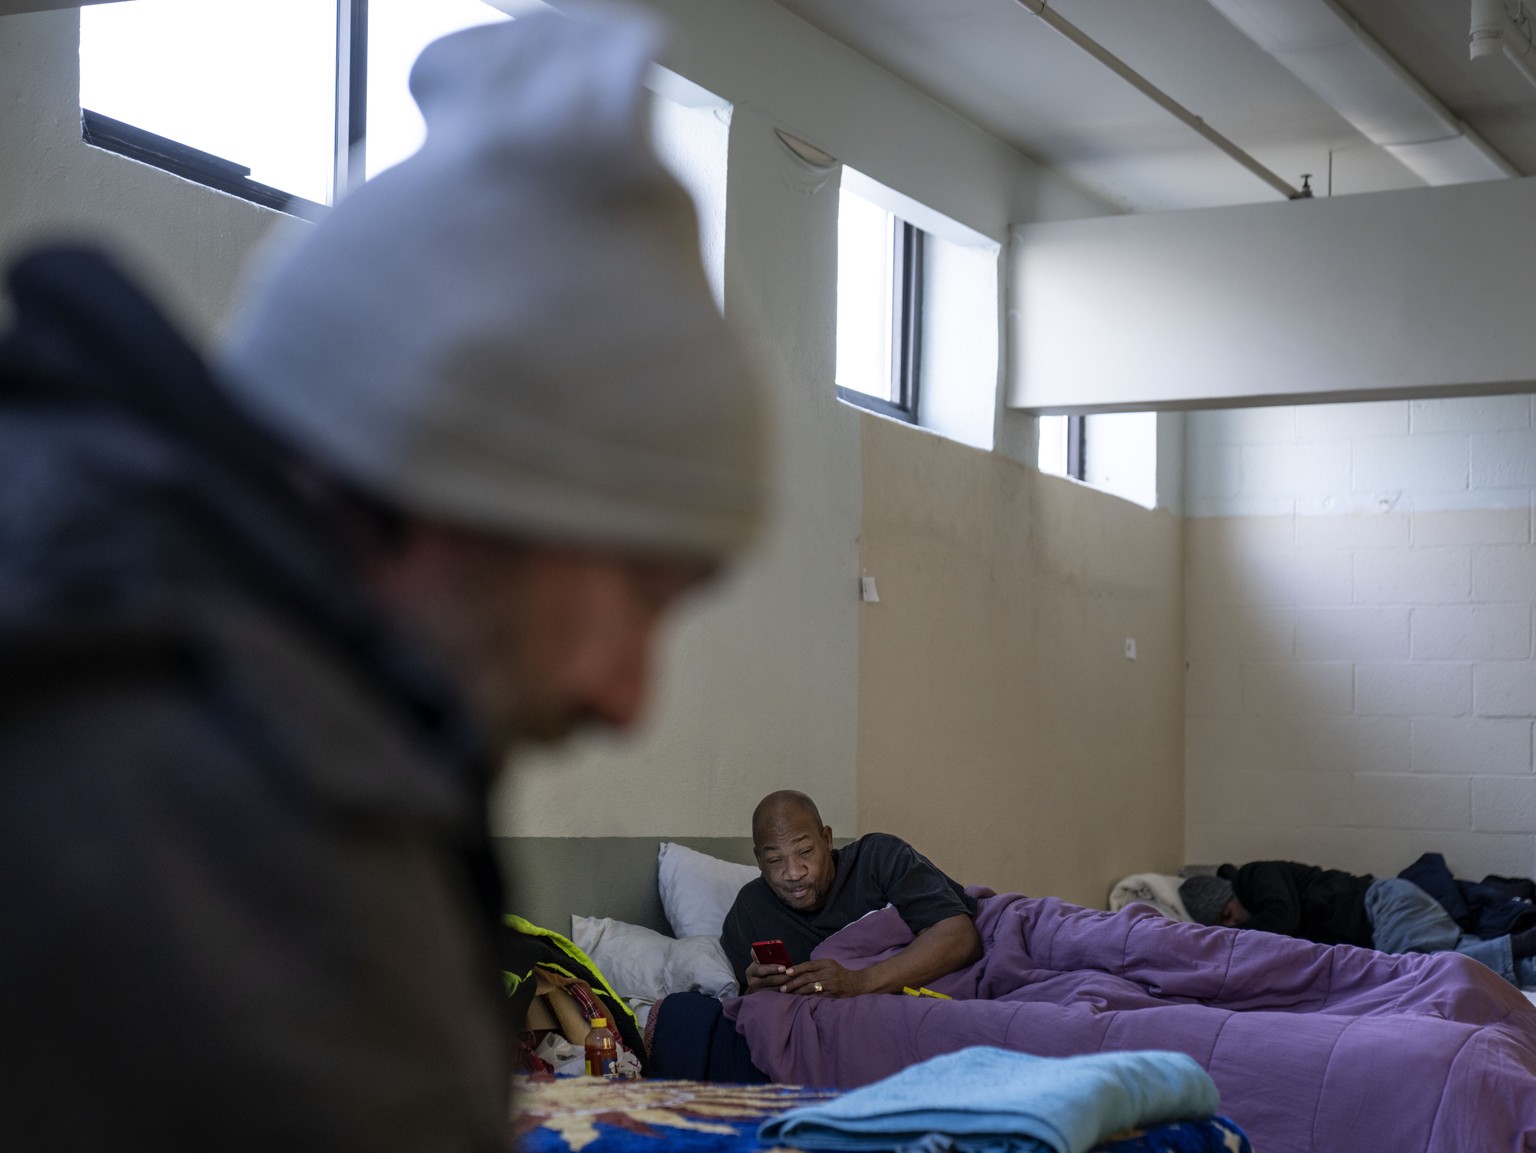 Thomas Moore, right, rests on his bed inside a shelter at Crossroads Rhode Island during a wave of frigid weather in Providence, R.I., Friday, Feb. 3, 2023. The shelter extended their hours to allow r ...